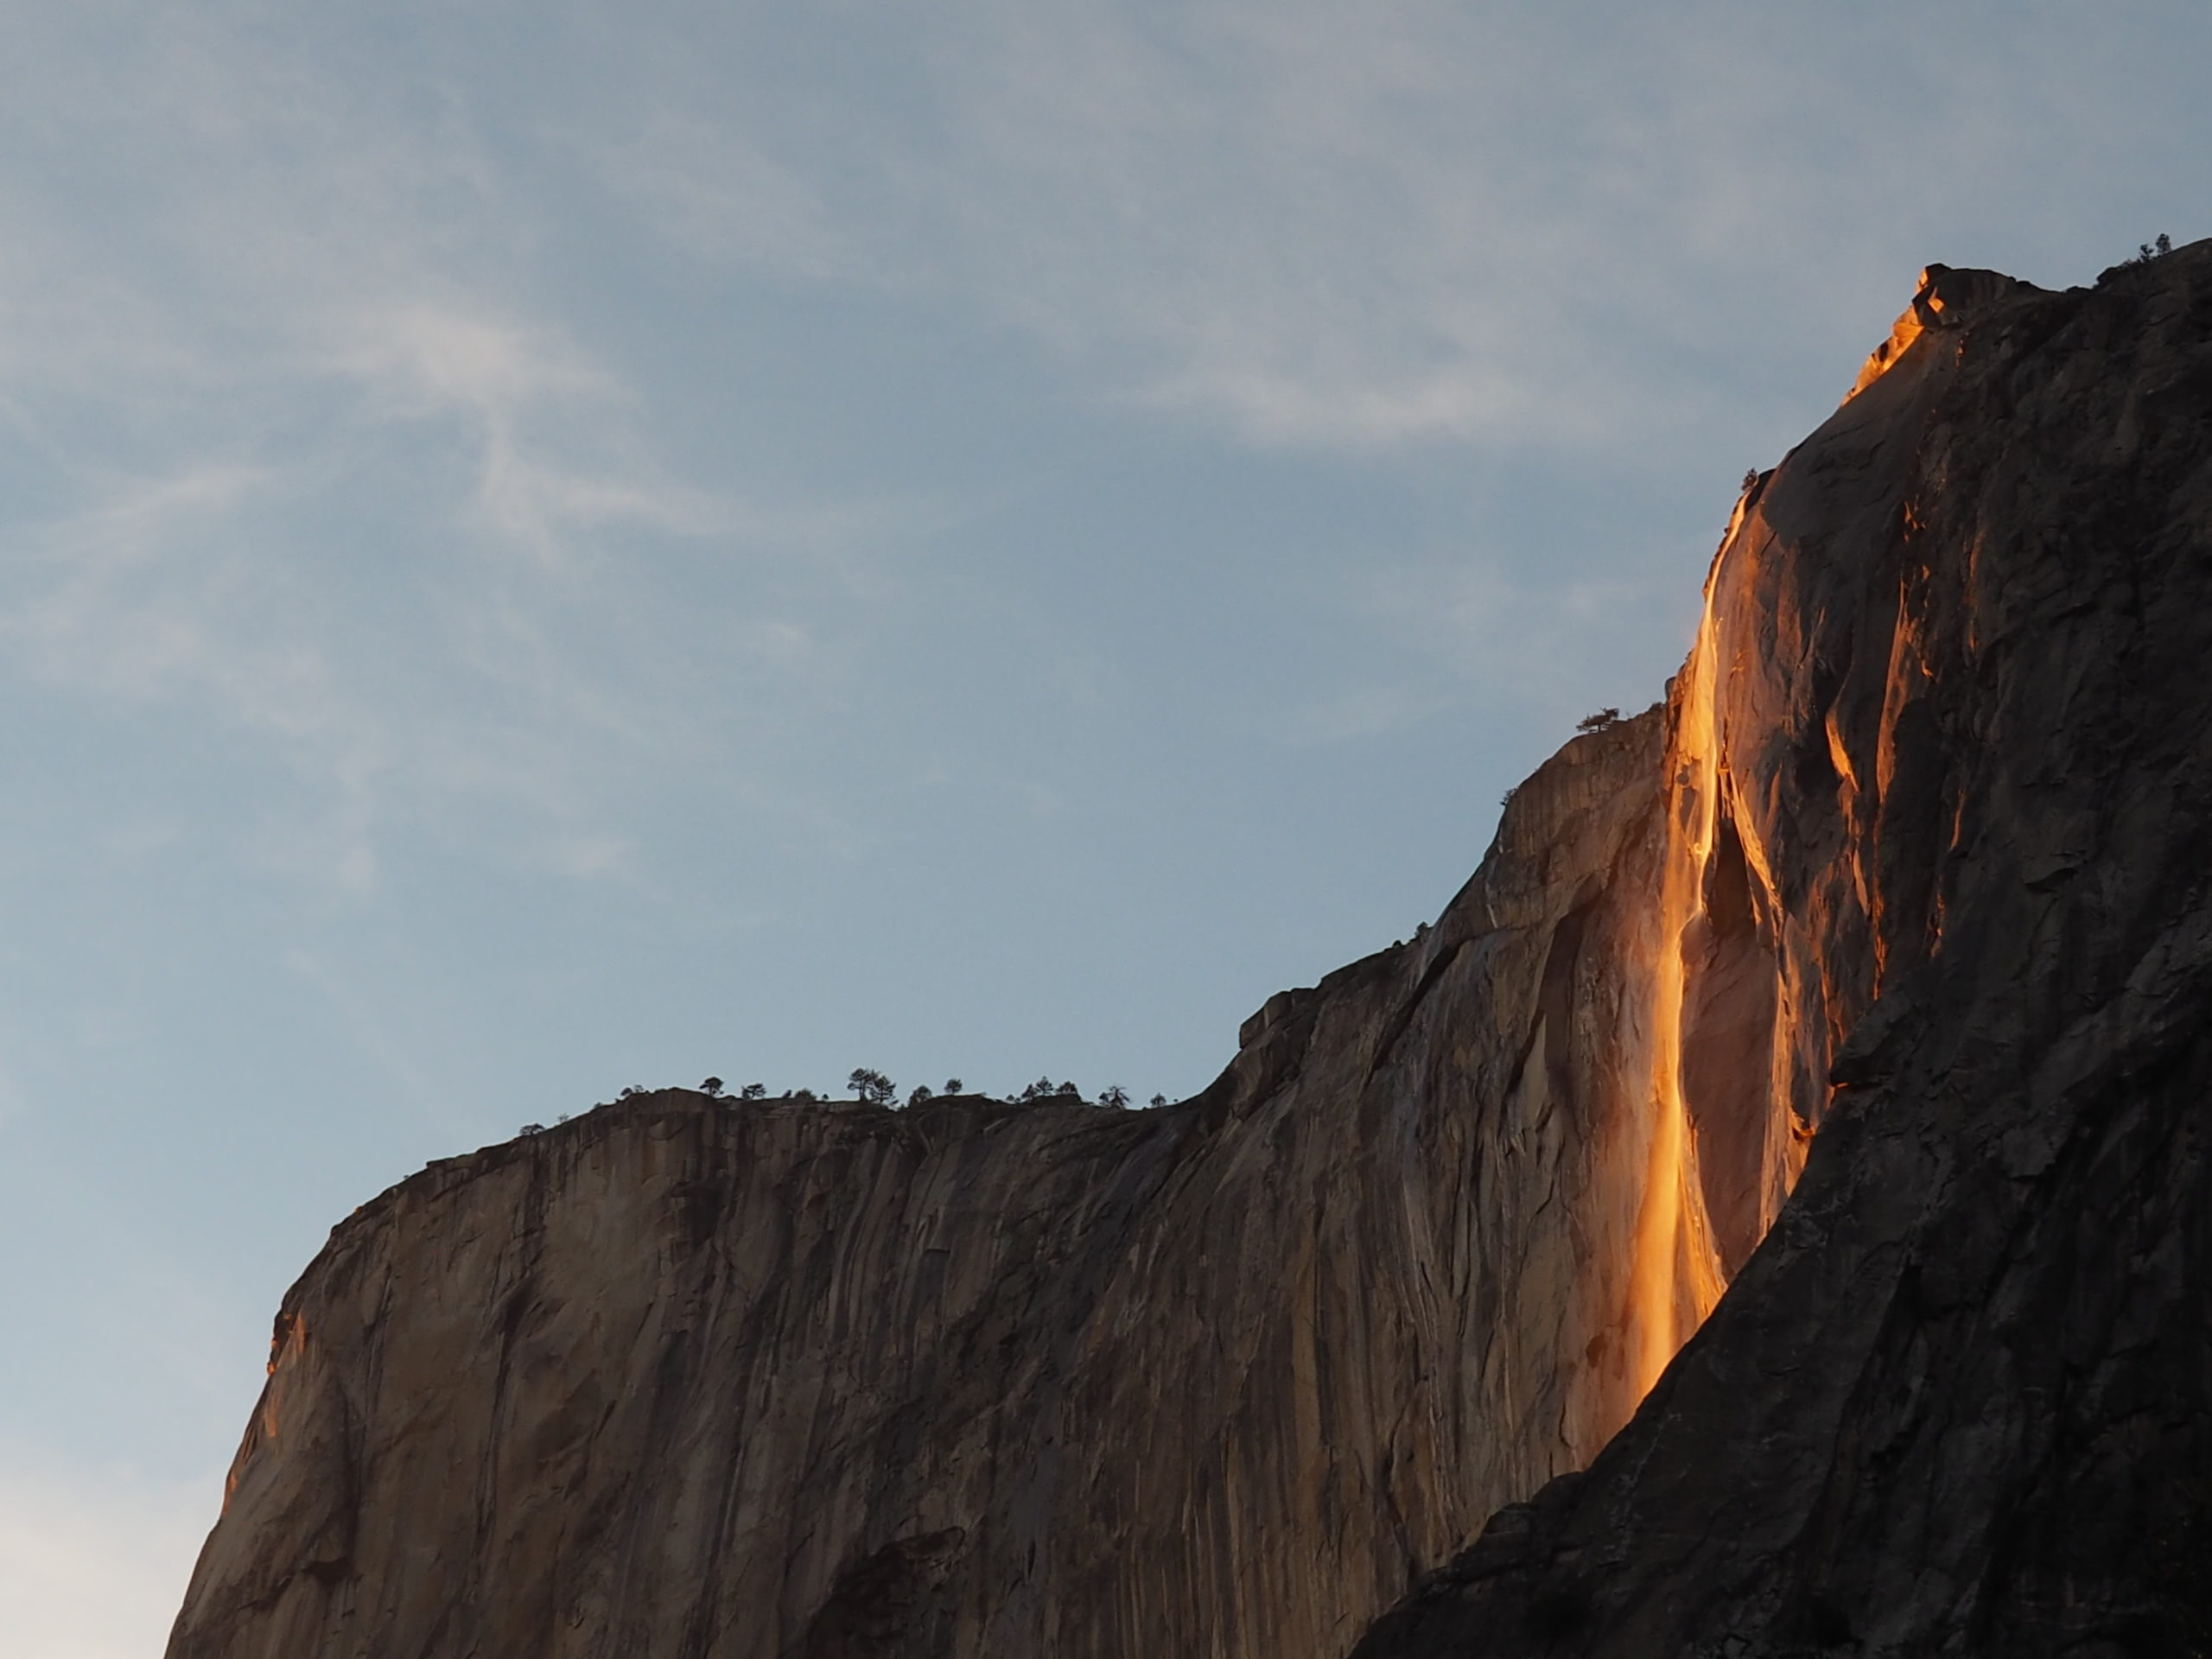 Witnessing The Horsetail Firefall In Yosemite Should Be On Everyone’s Bucket List